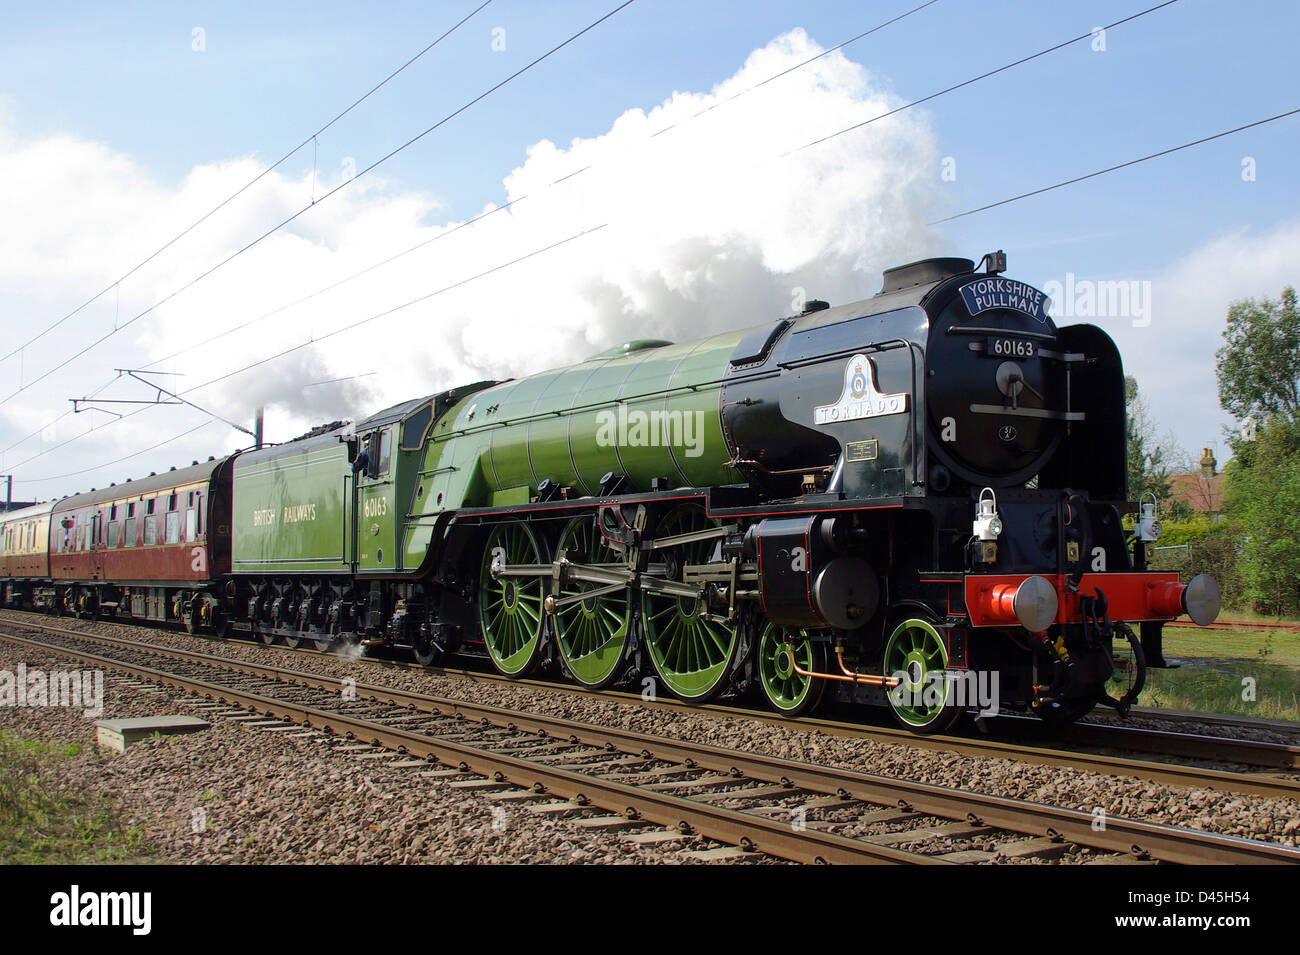 60163 Tornado mainline steam locomotive train, newly built in England. Completed in 2008 it often runs on UK mainline rails. Hauling special Stock Photo